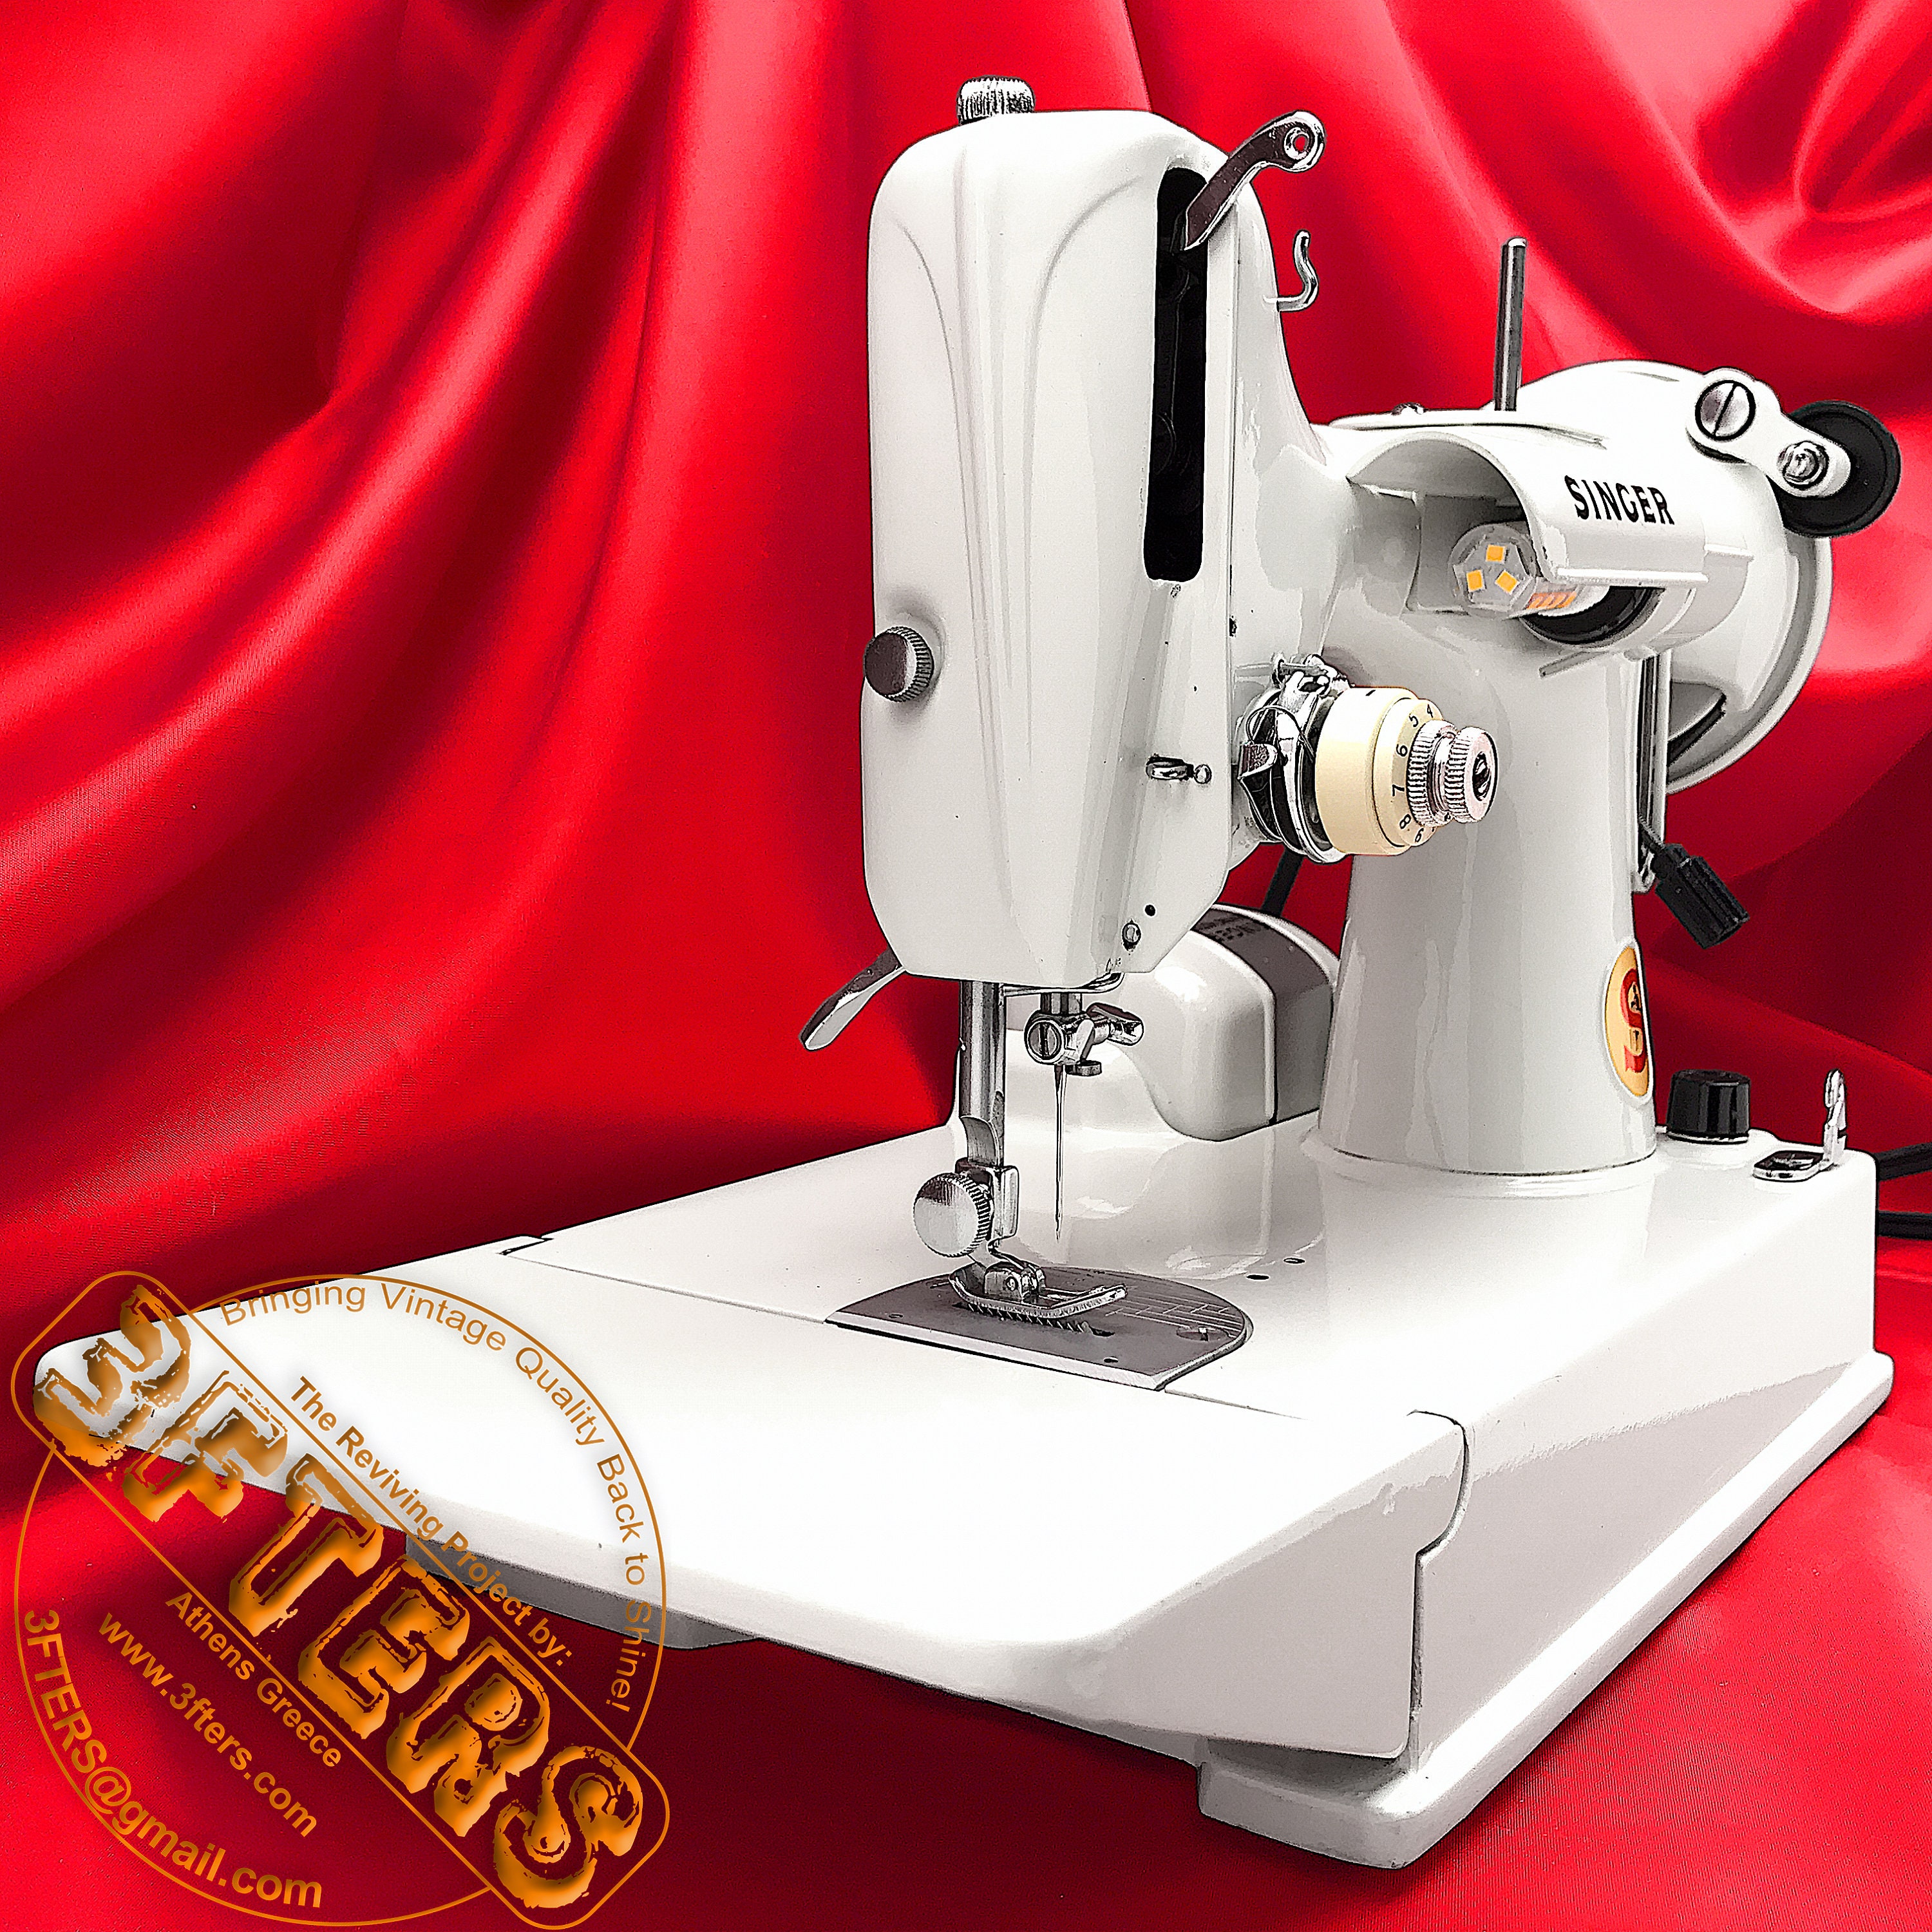 Thread Post for Vintage Singer Sewing Machines 